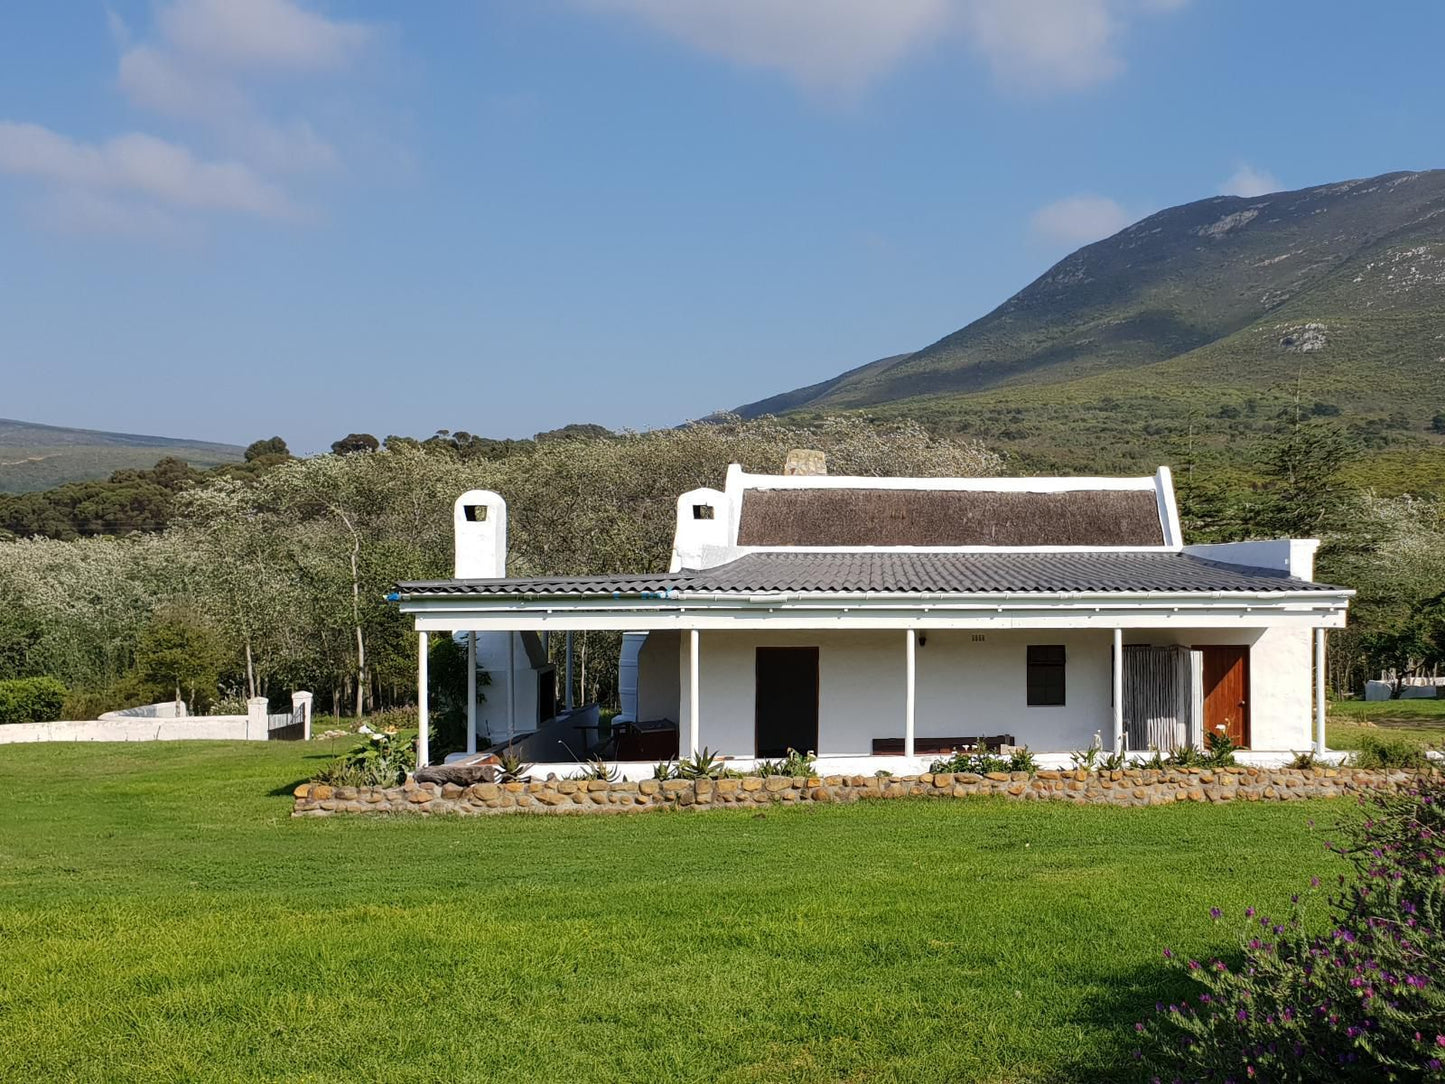 Berg N Dal Heritage Farm Gansbaai Western Cape South Africa Complementary Colors, Mountain, Nature, Highland